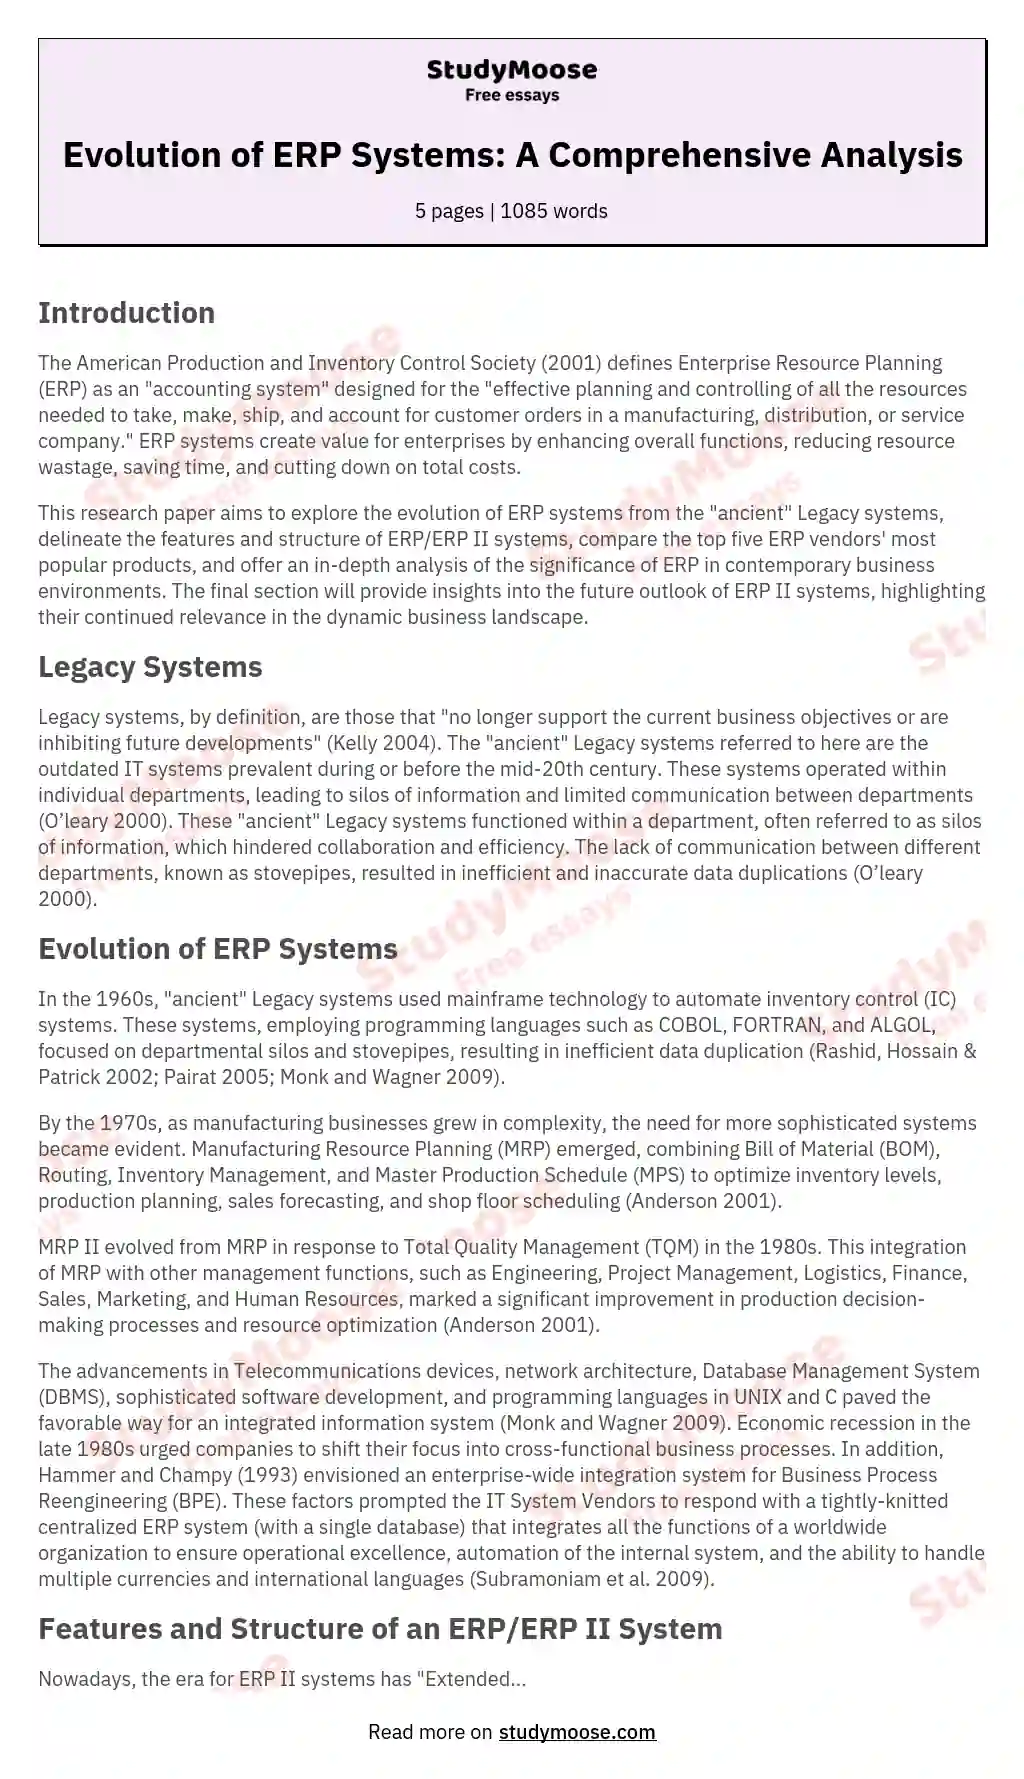 Evolution of ERP Systems: A Comprehensive Analysis essay